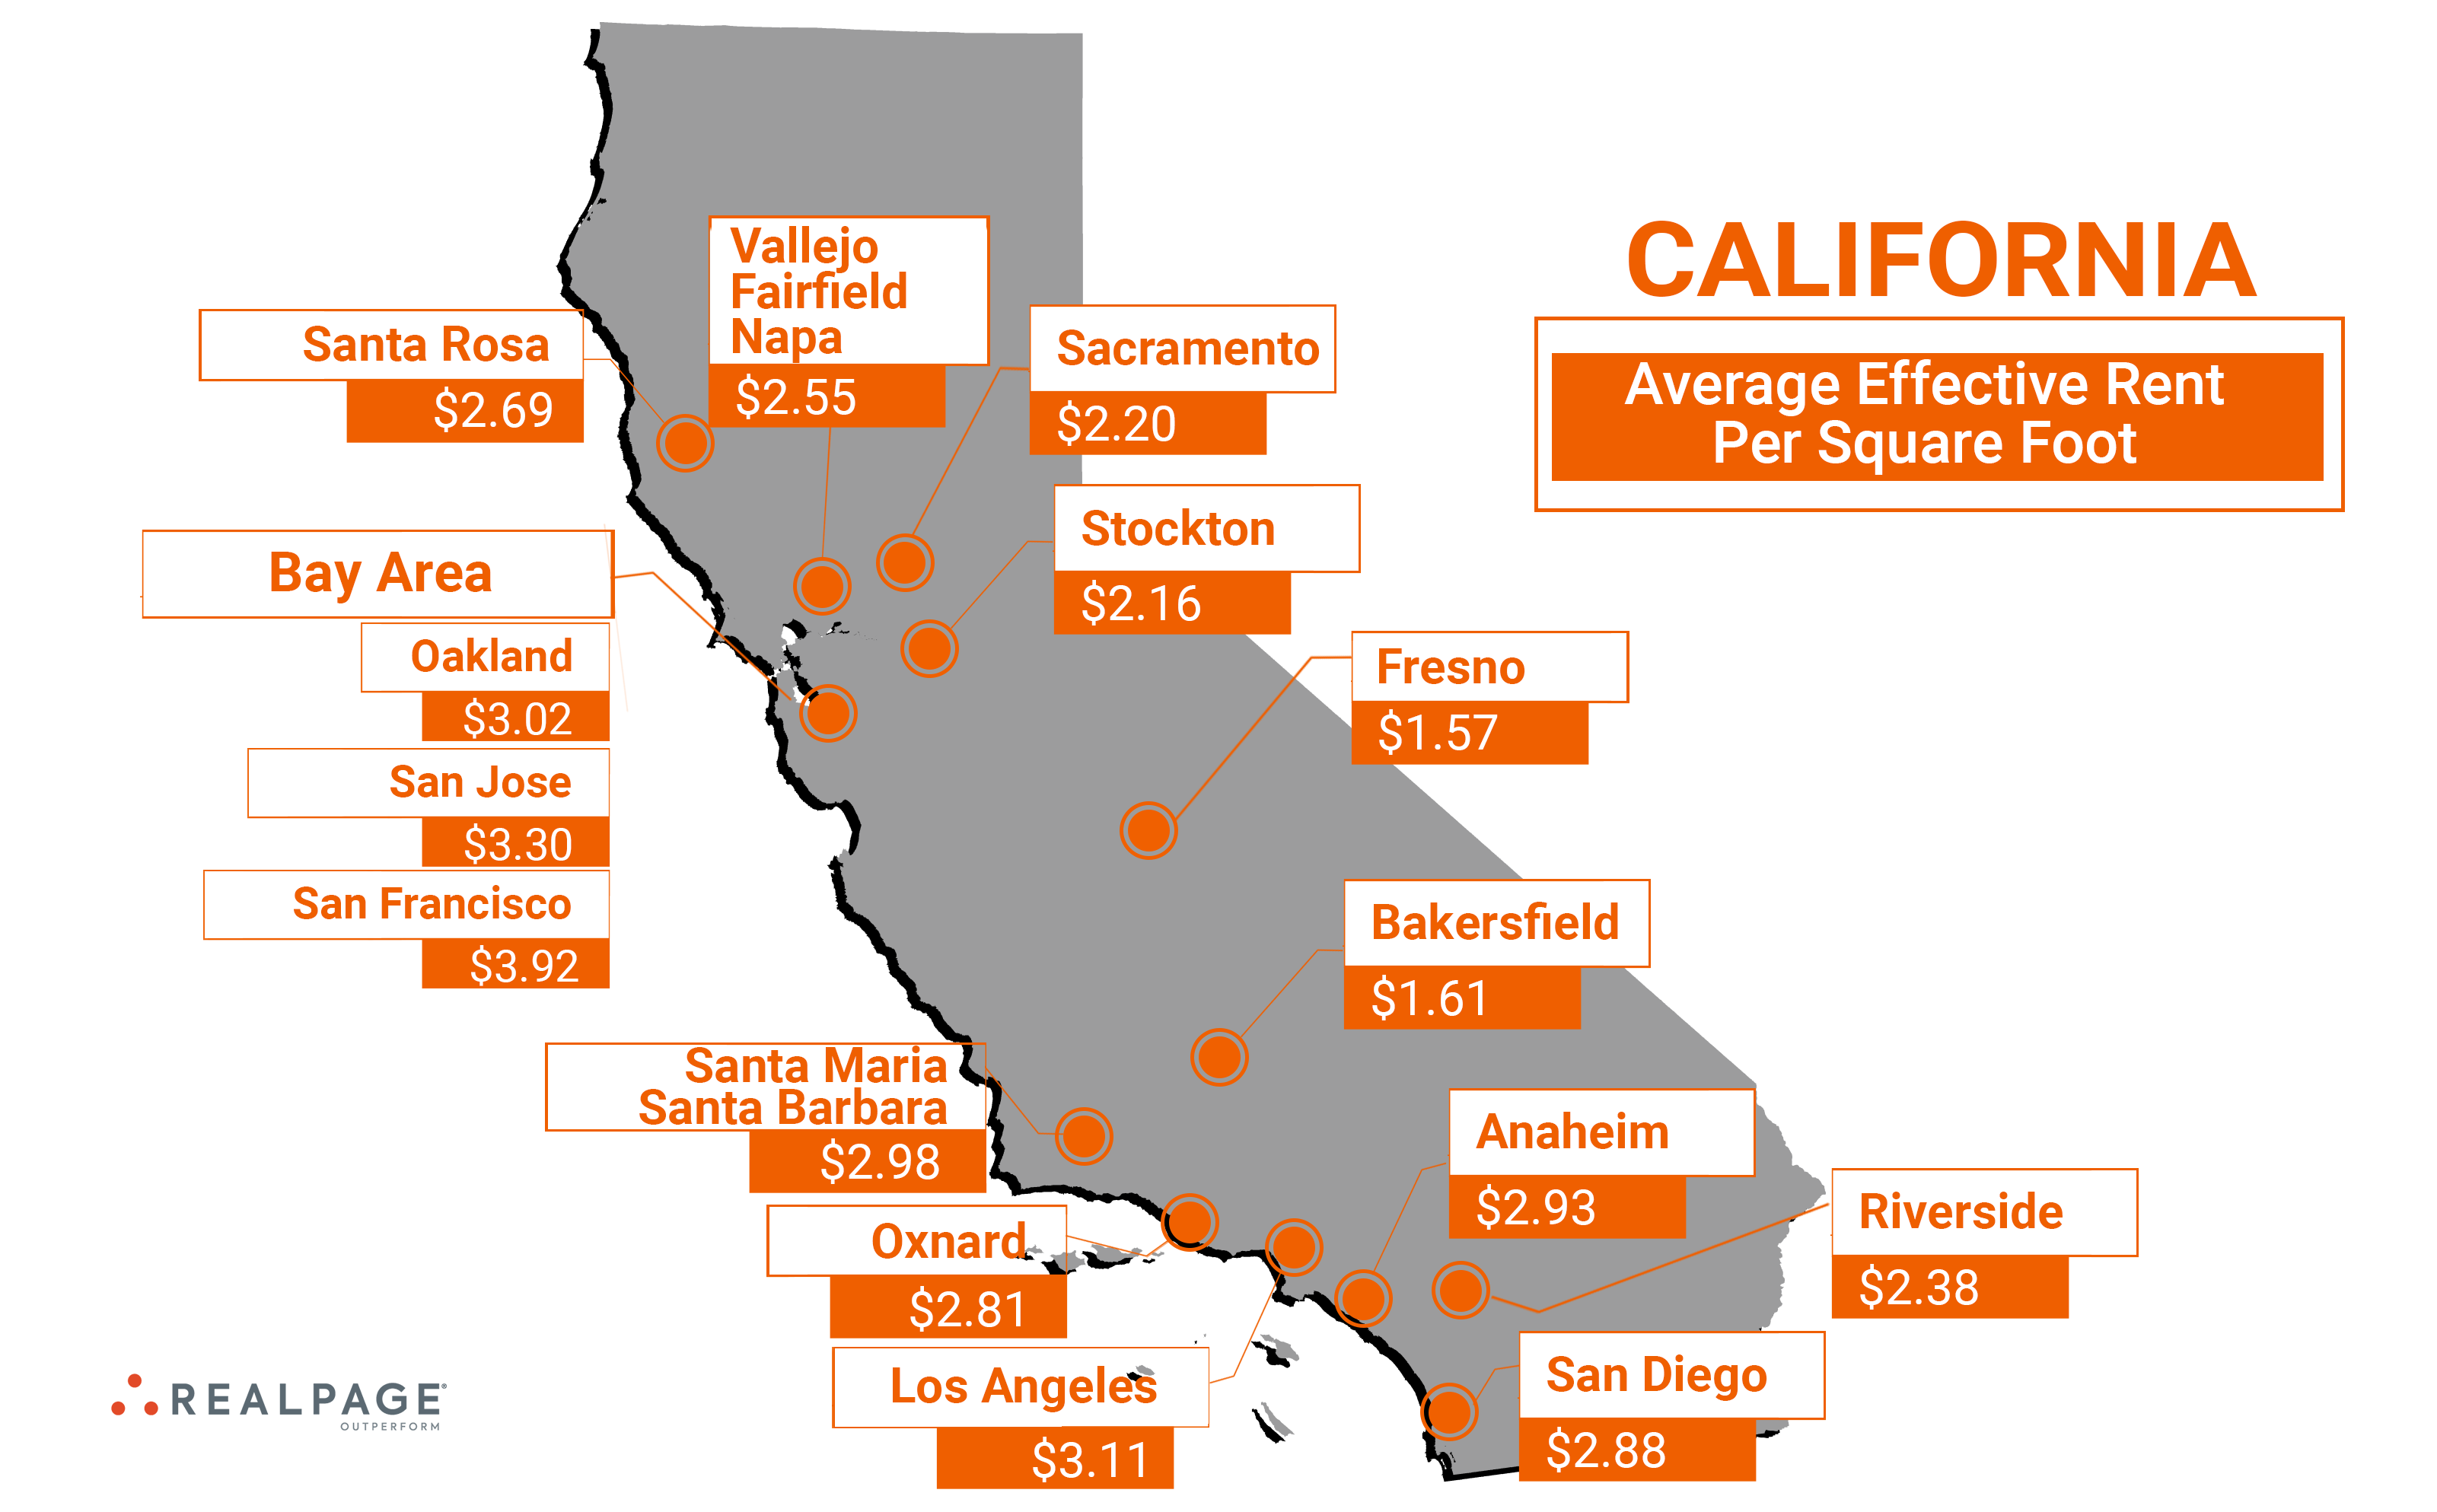 California Apartment Markets Ranked by Rent Per Square Foot RealPage